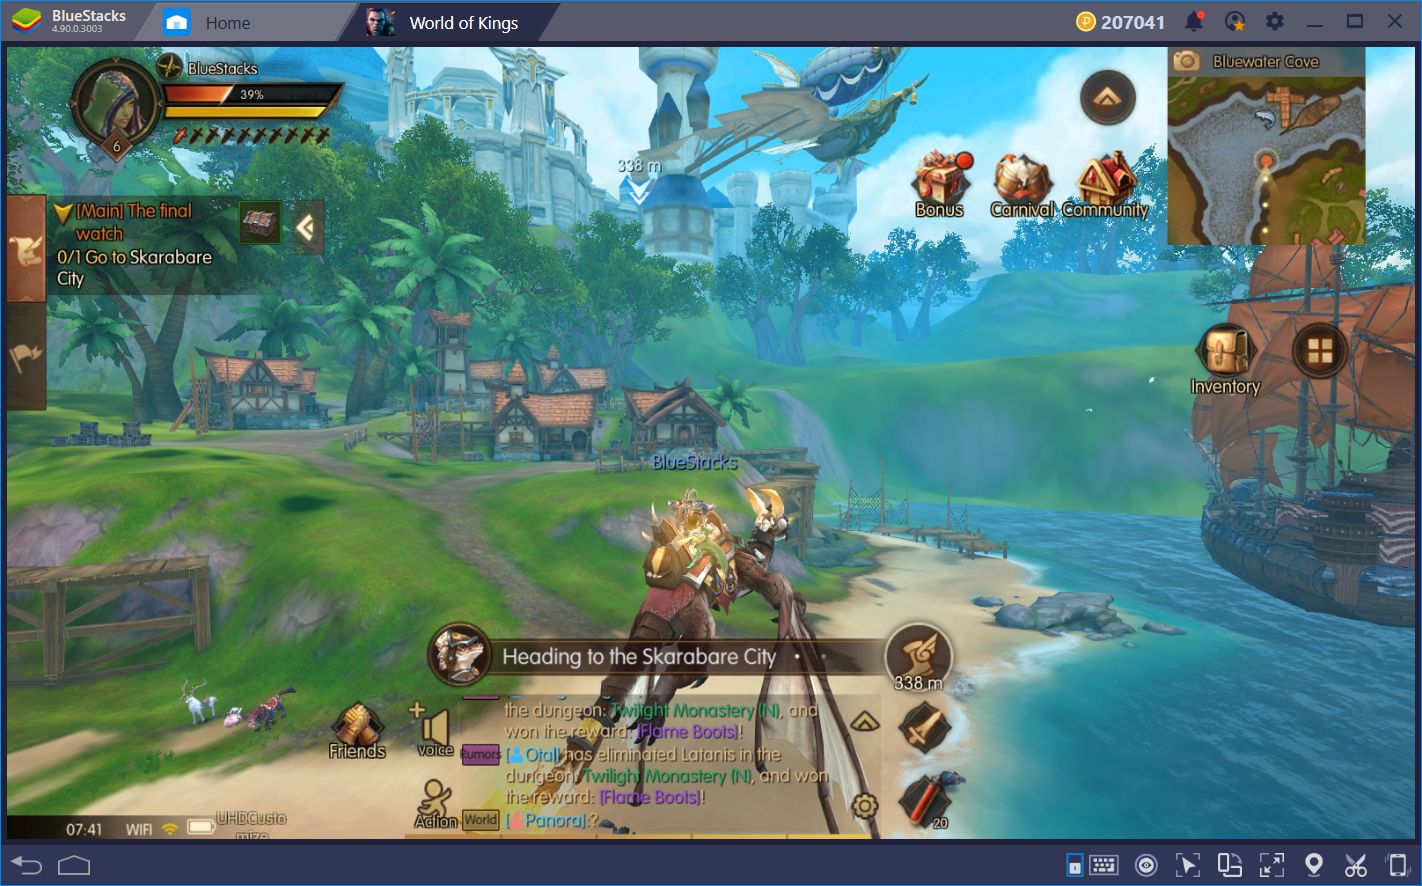 World of Kings: Como World of Warcraft, Pero en Android